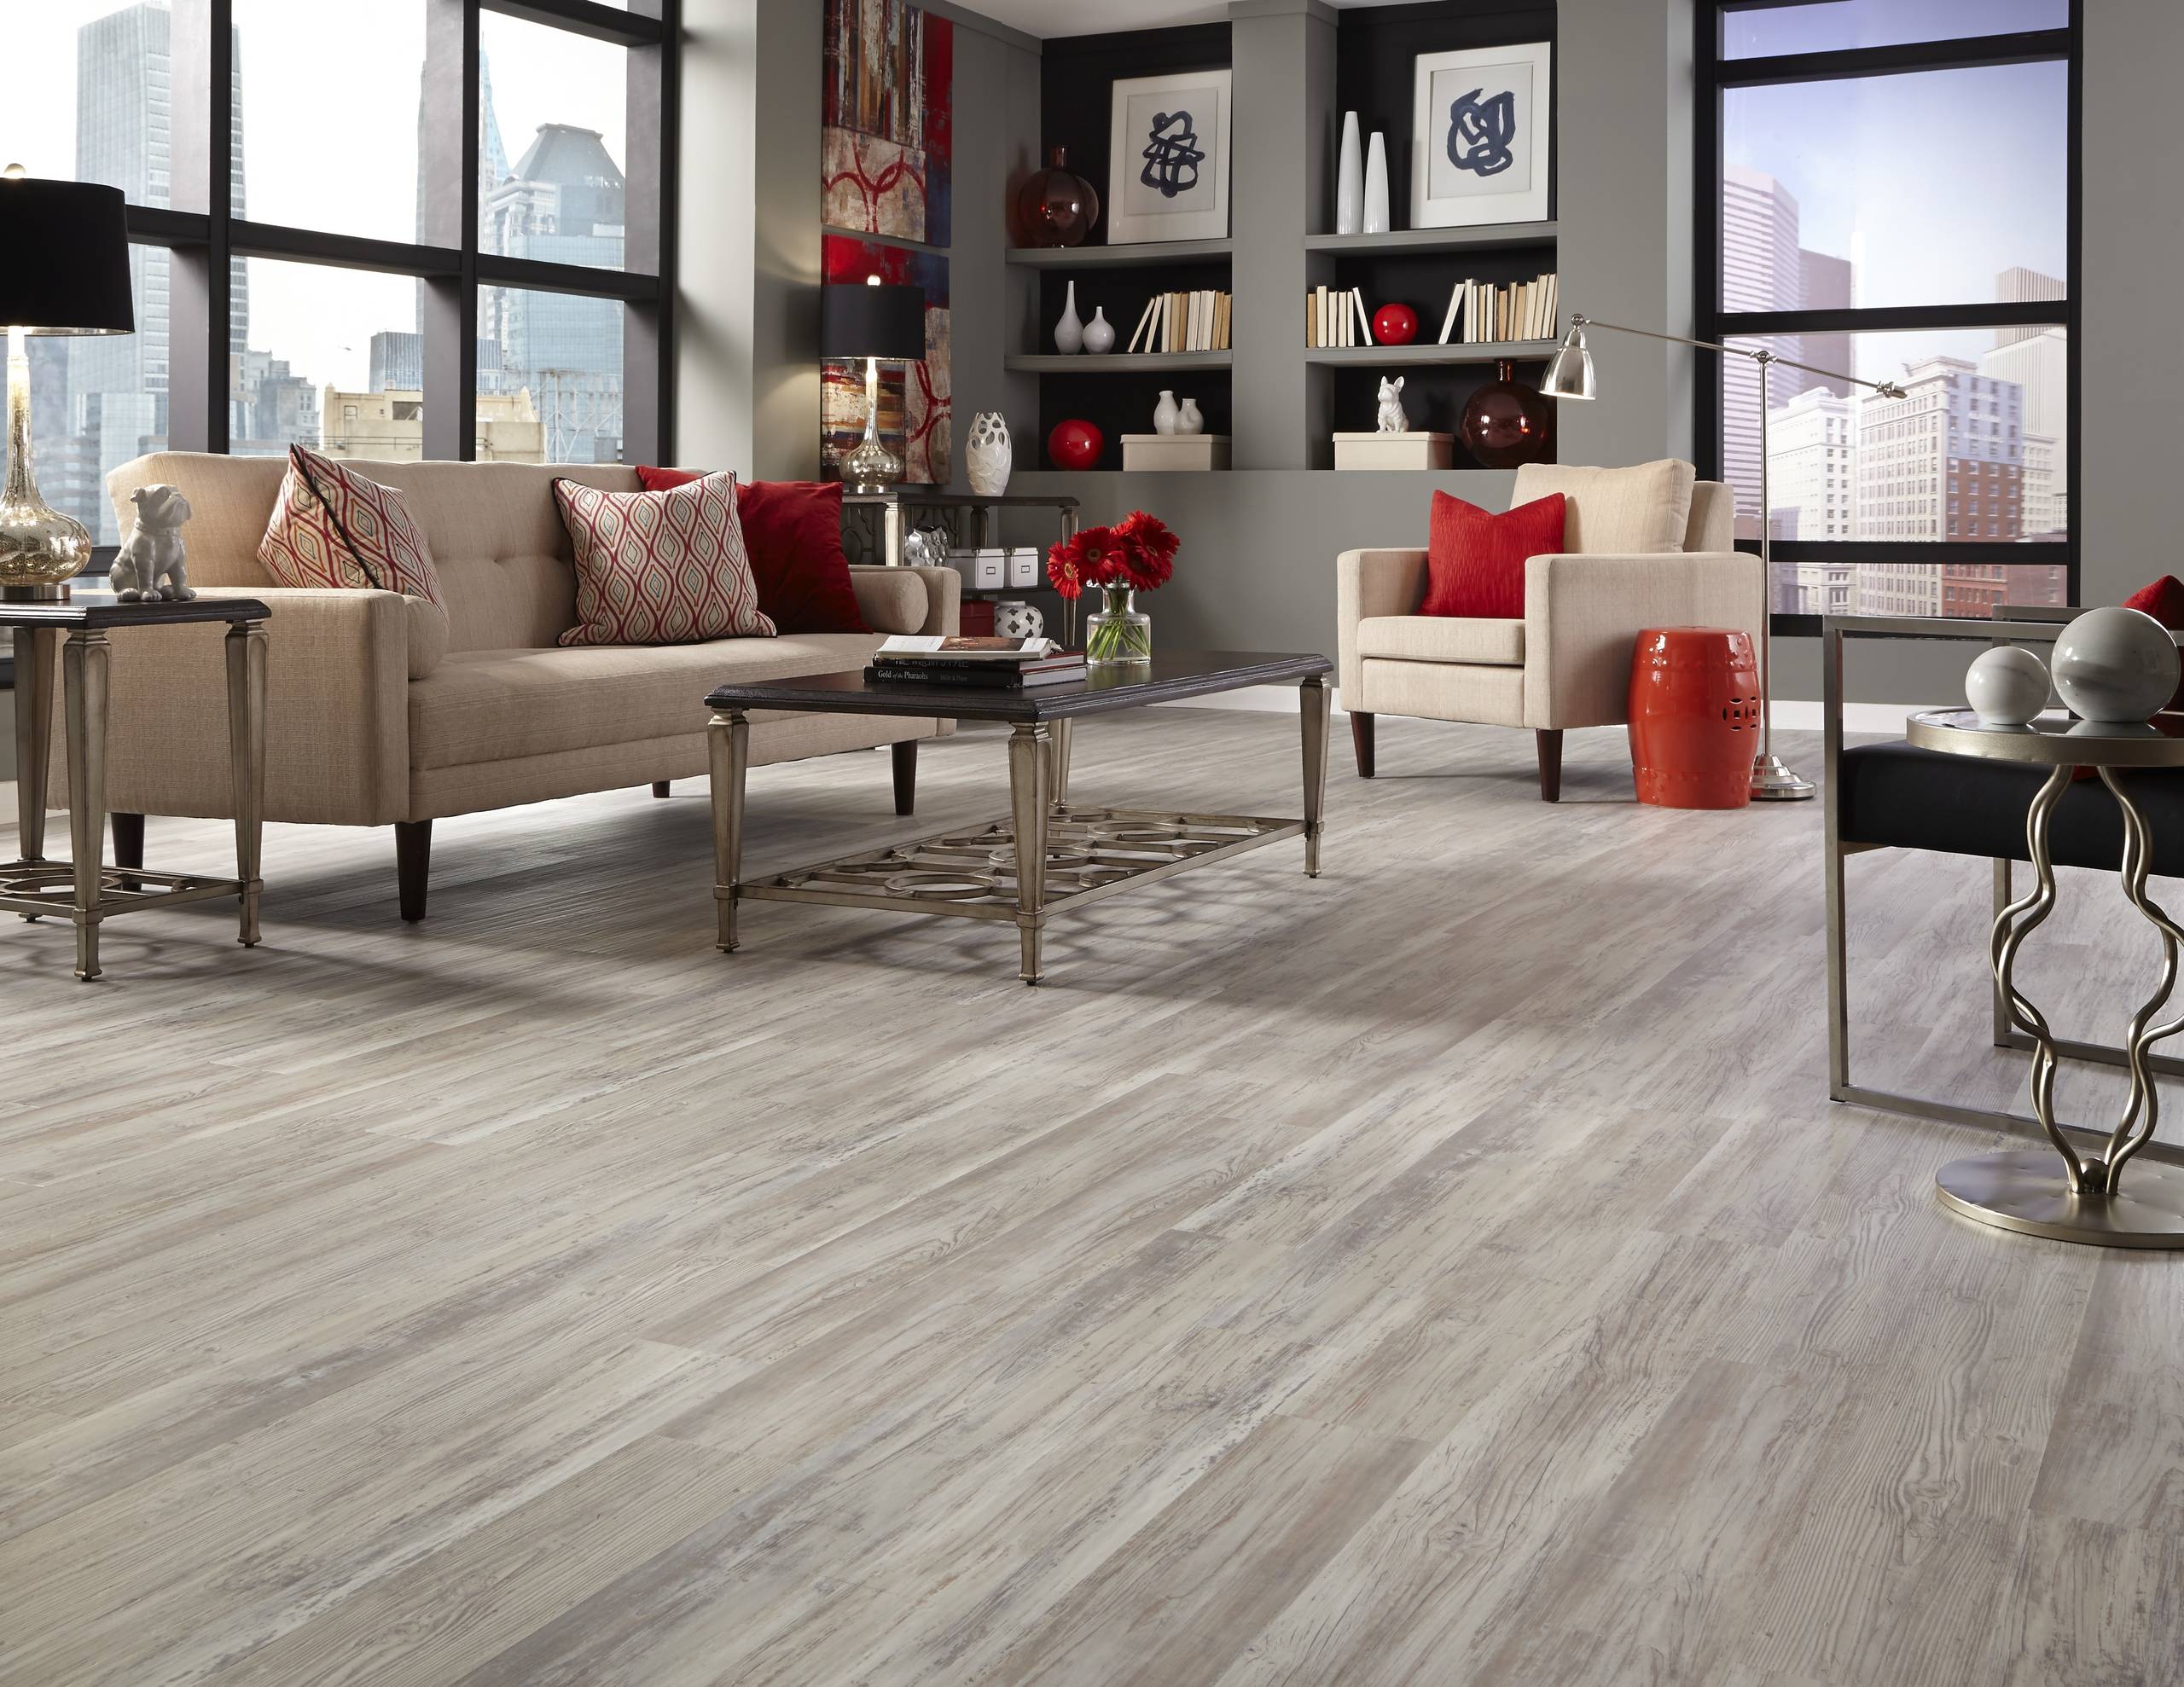 Tranquility 5mm Grizzly Bay Oak Click Resilient Vinyl Modern Living Room Other By Ll Flooring Houzz